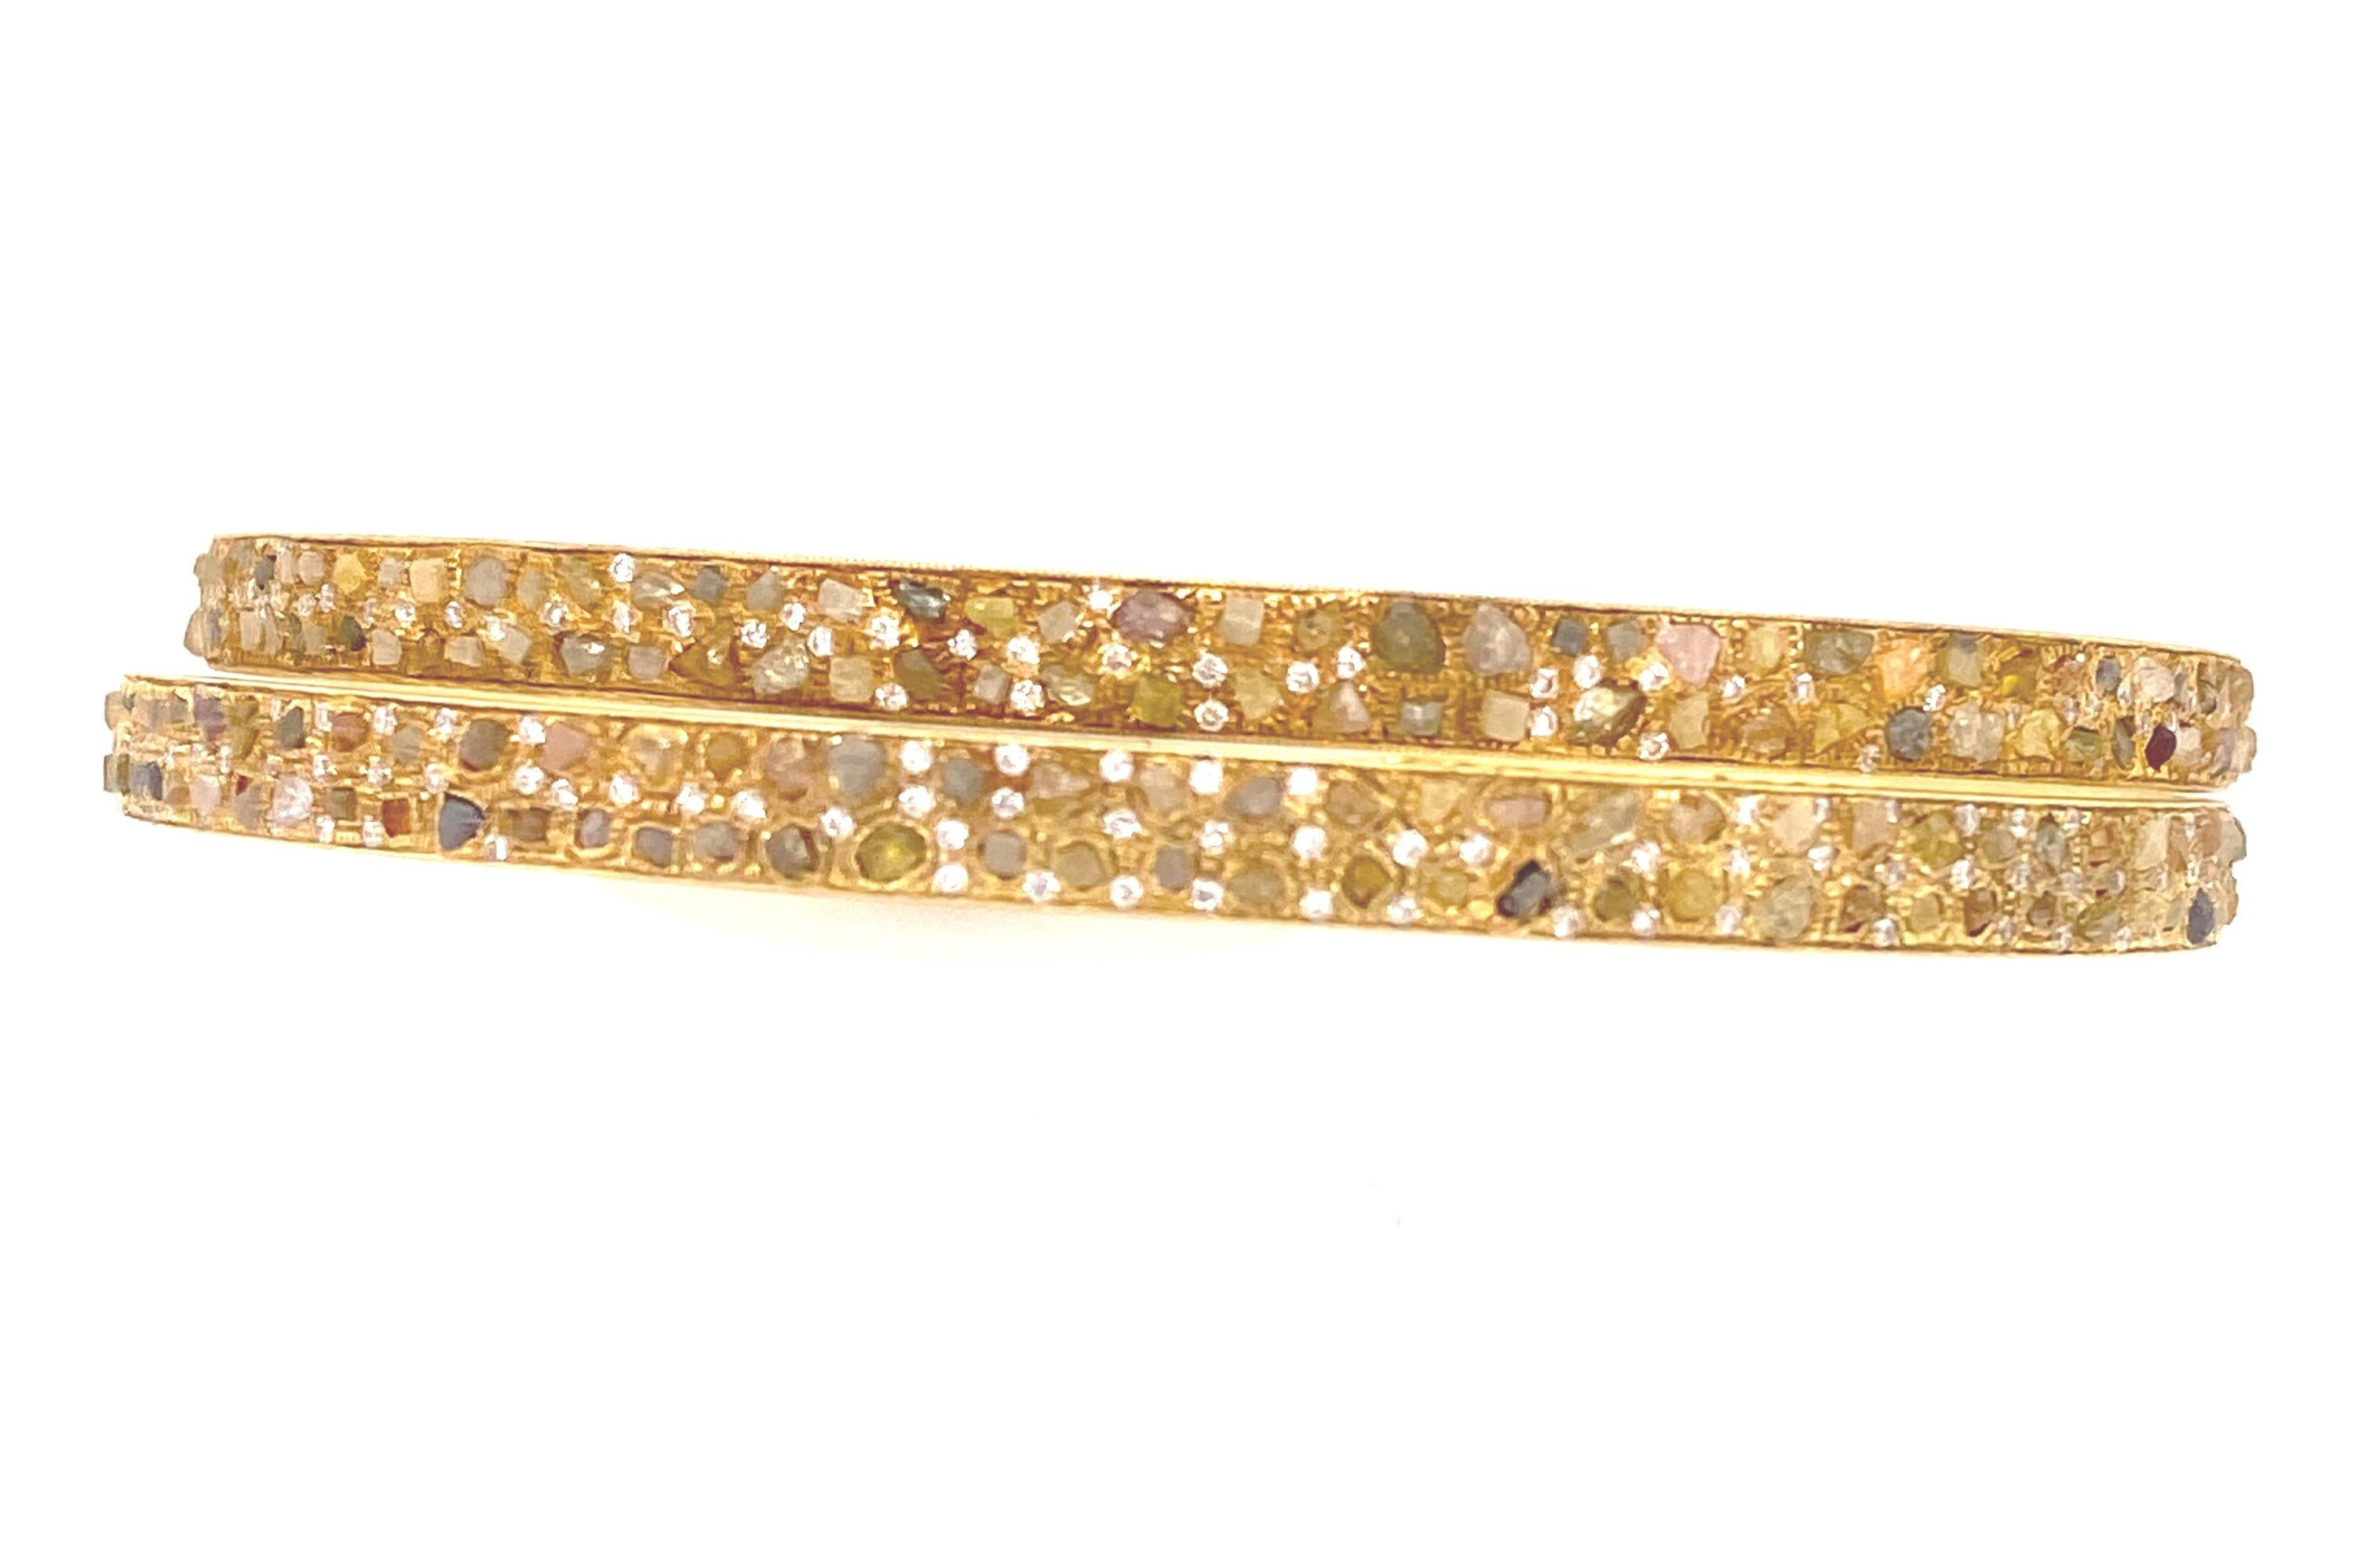 Designer Signed 7.85 Carats Fancy Color Raw Diamonds 18K Gold Bangle. This is a stunning set of two yellow gold bangle with fancy champagne, yellow, green and brown color rough raw diamonds. There are round accent white diamonds all around the